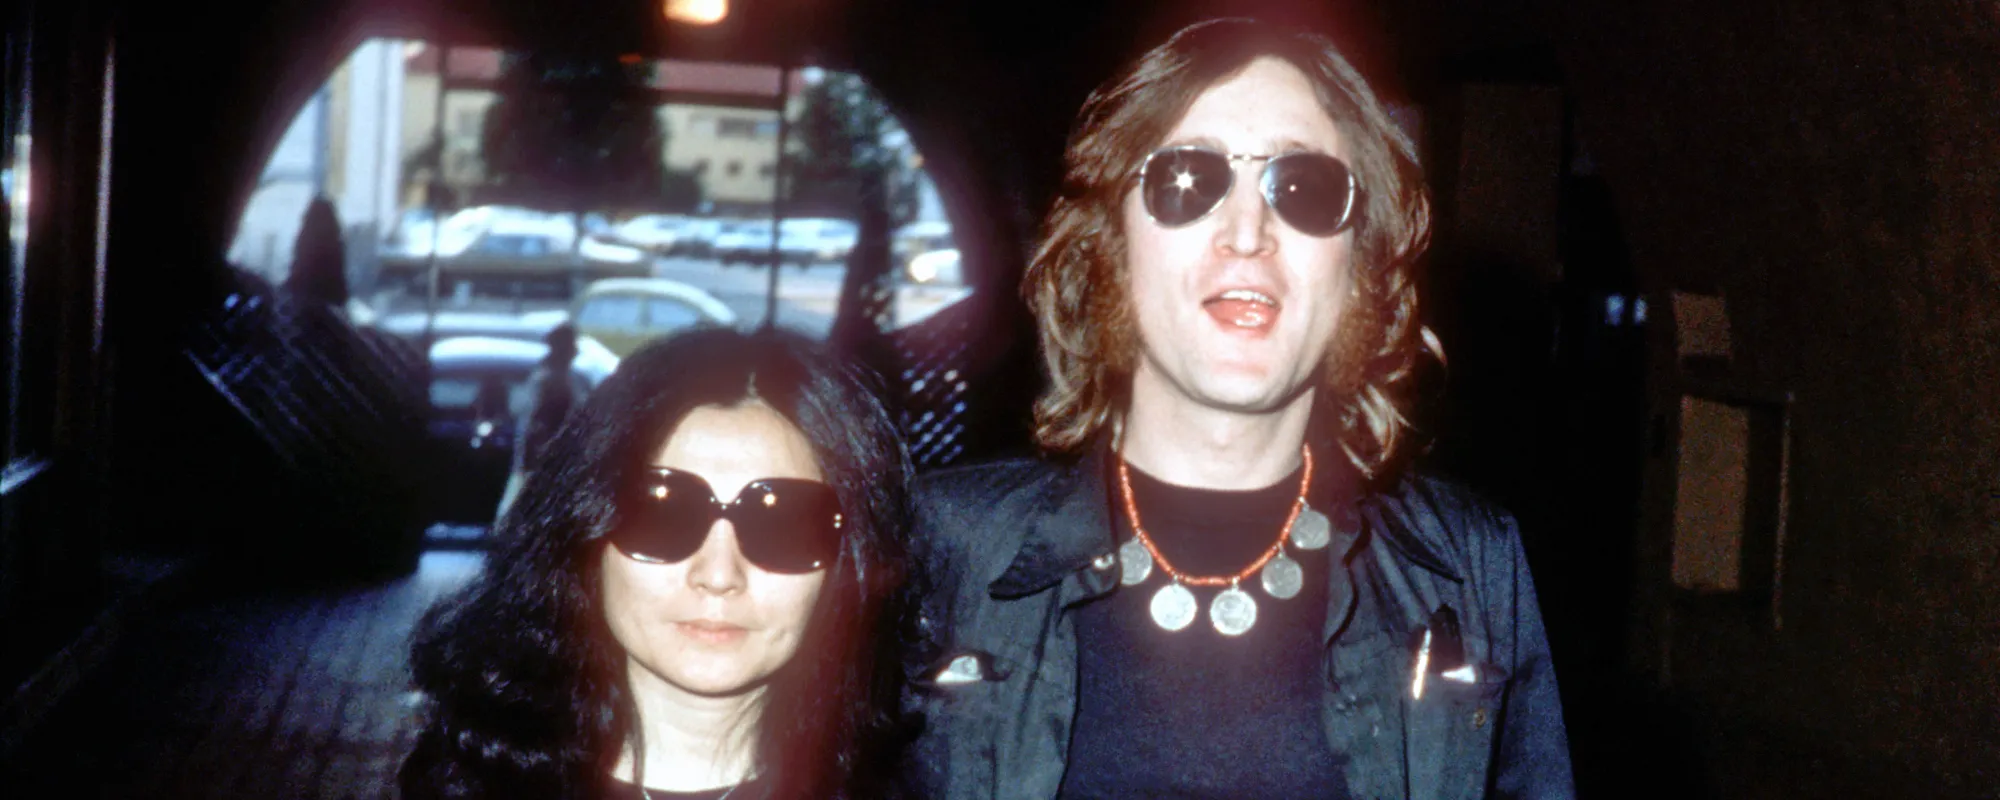 The Song John Lennon Wrote to Clear his Conscience